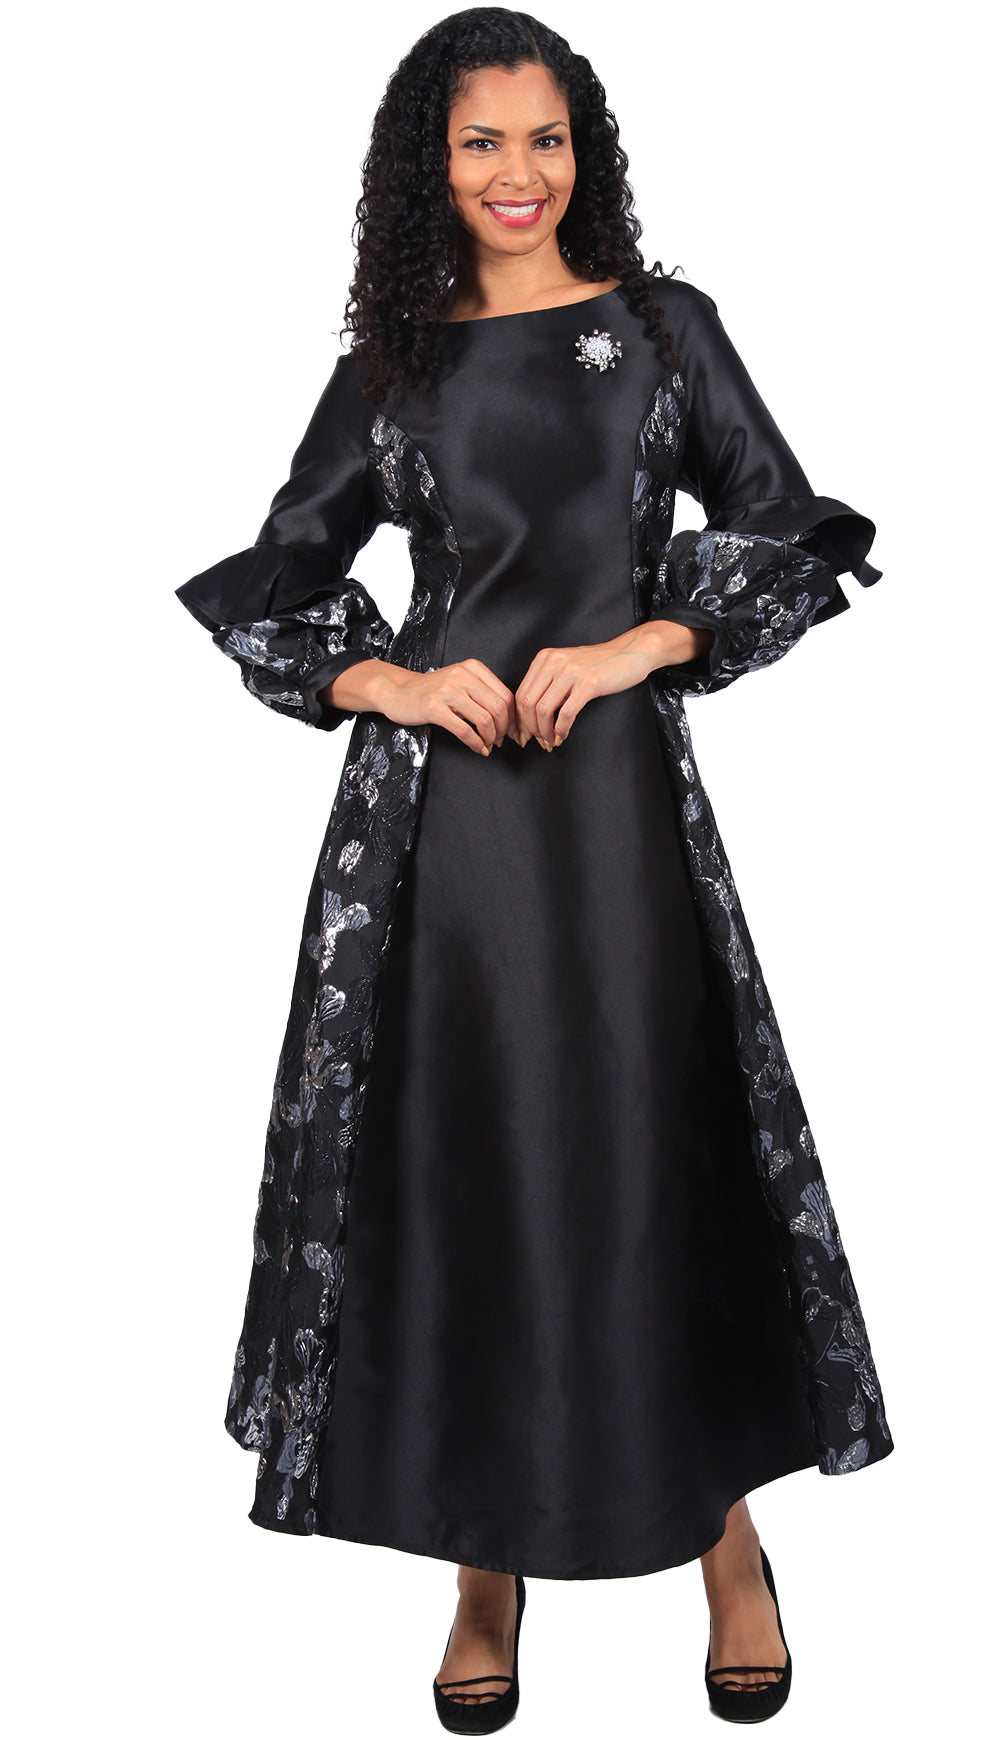 Diana Couture Church Dress 8664C-Black/Silver - Church Suits For Less